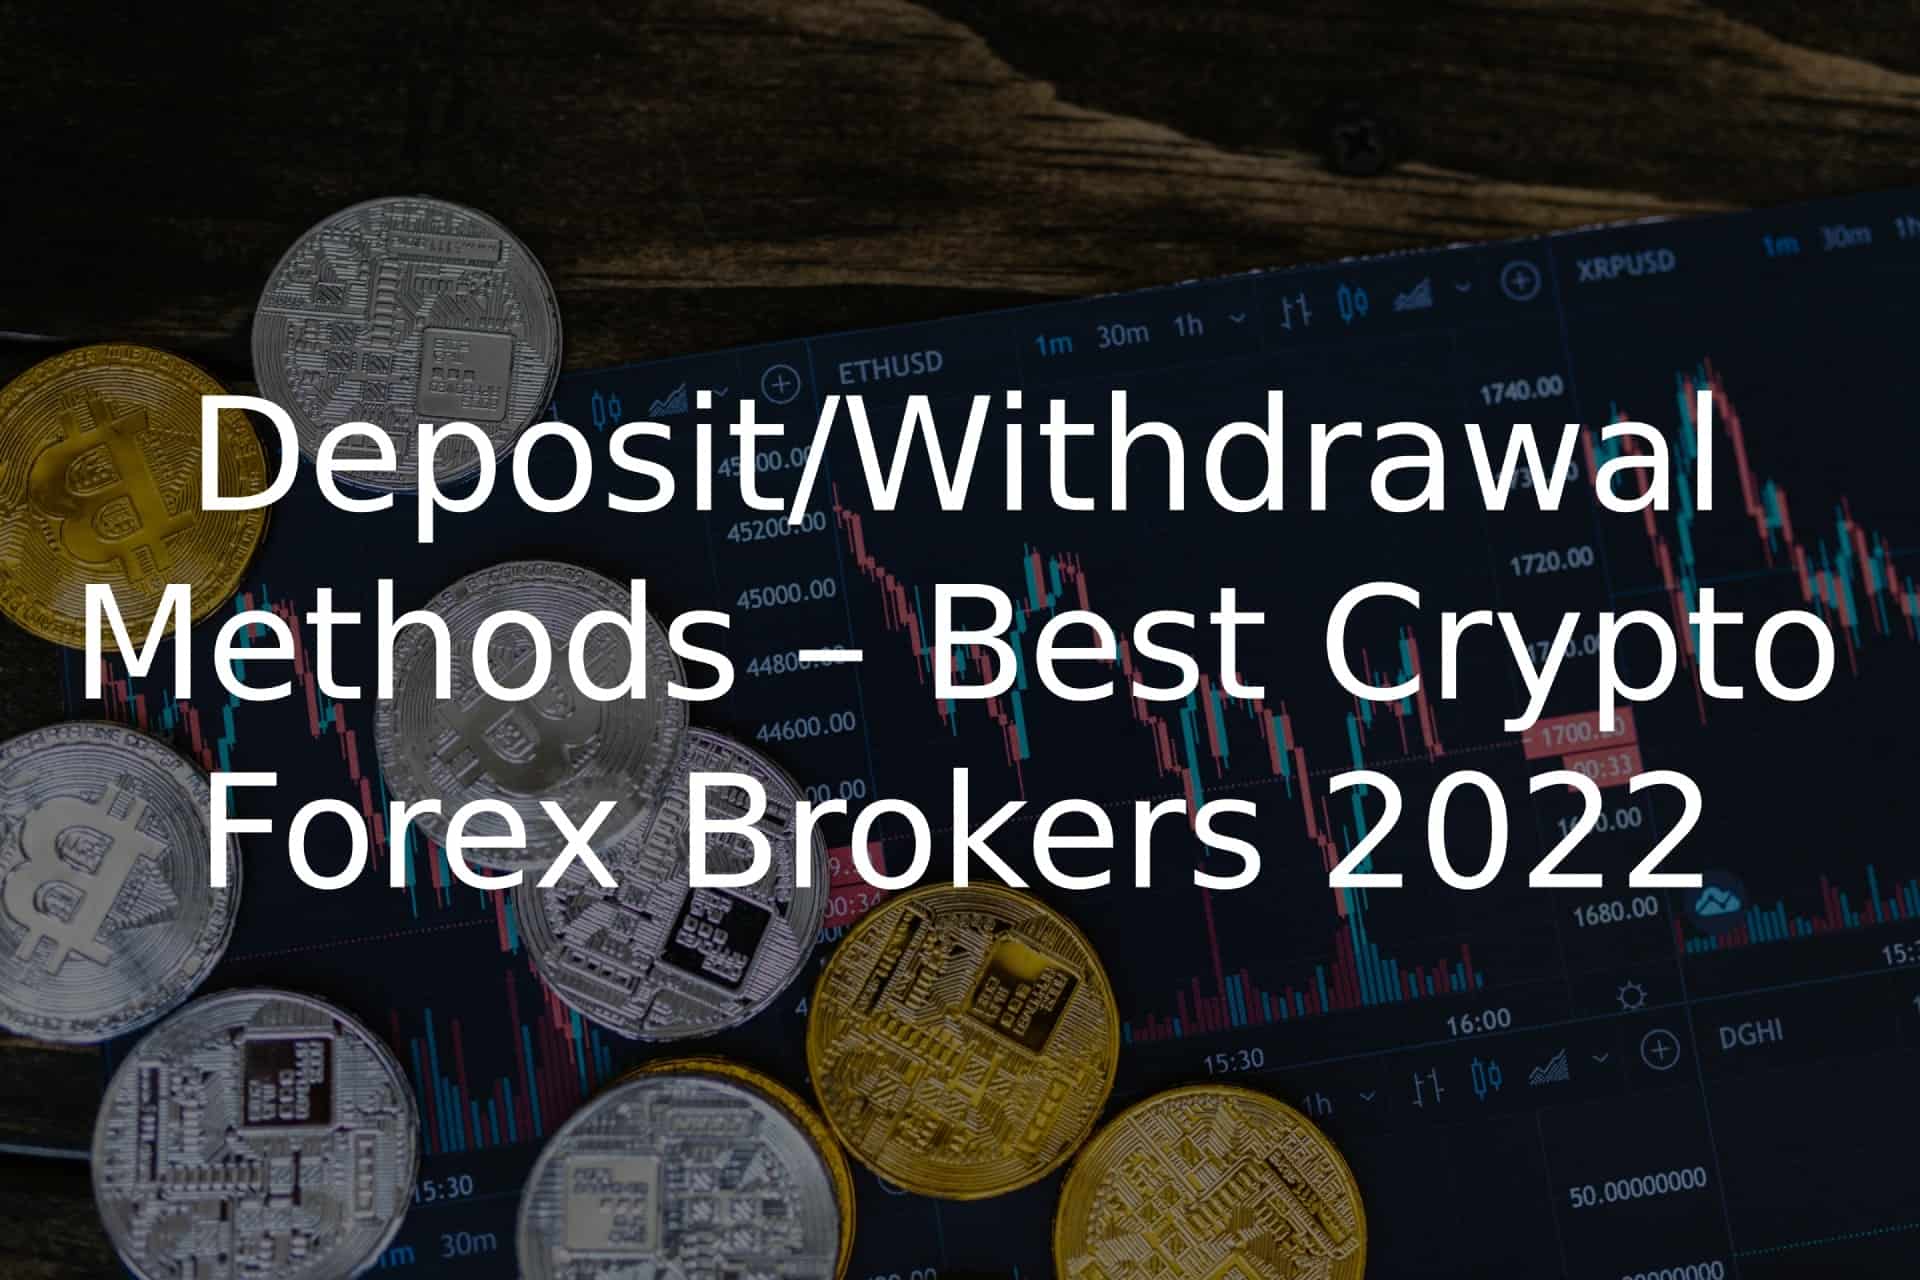 Best Crypto Forex Brokers